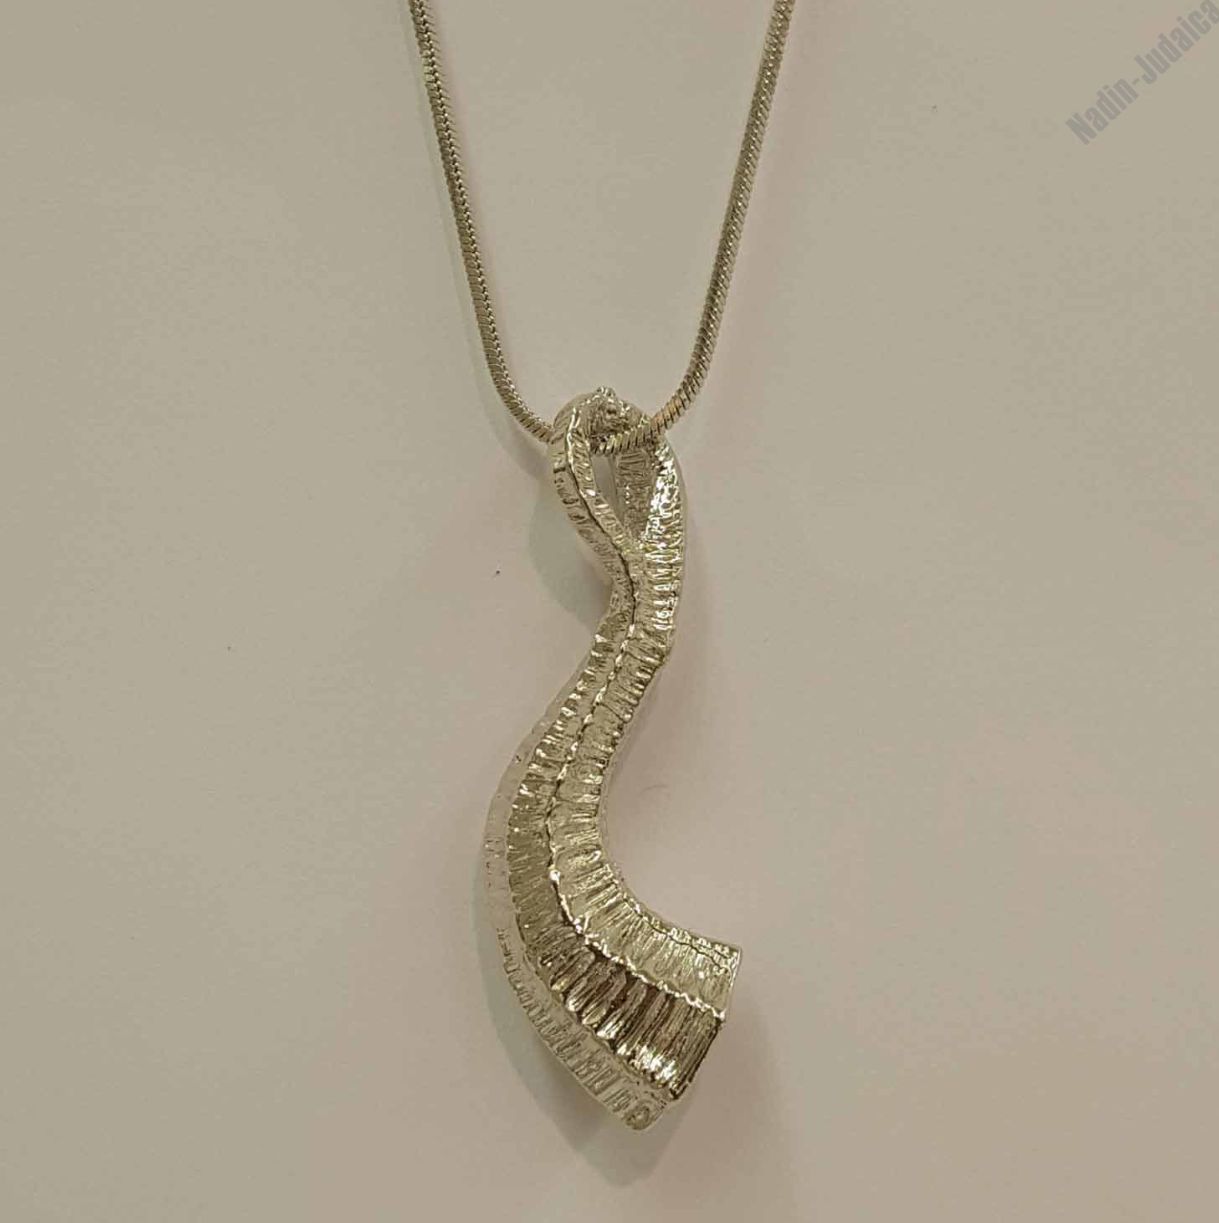 Necklace with Gold-Colored Pendant in Shape of Shofar